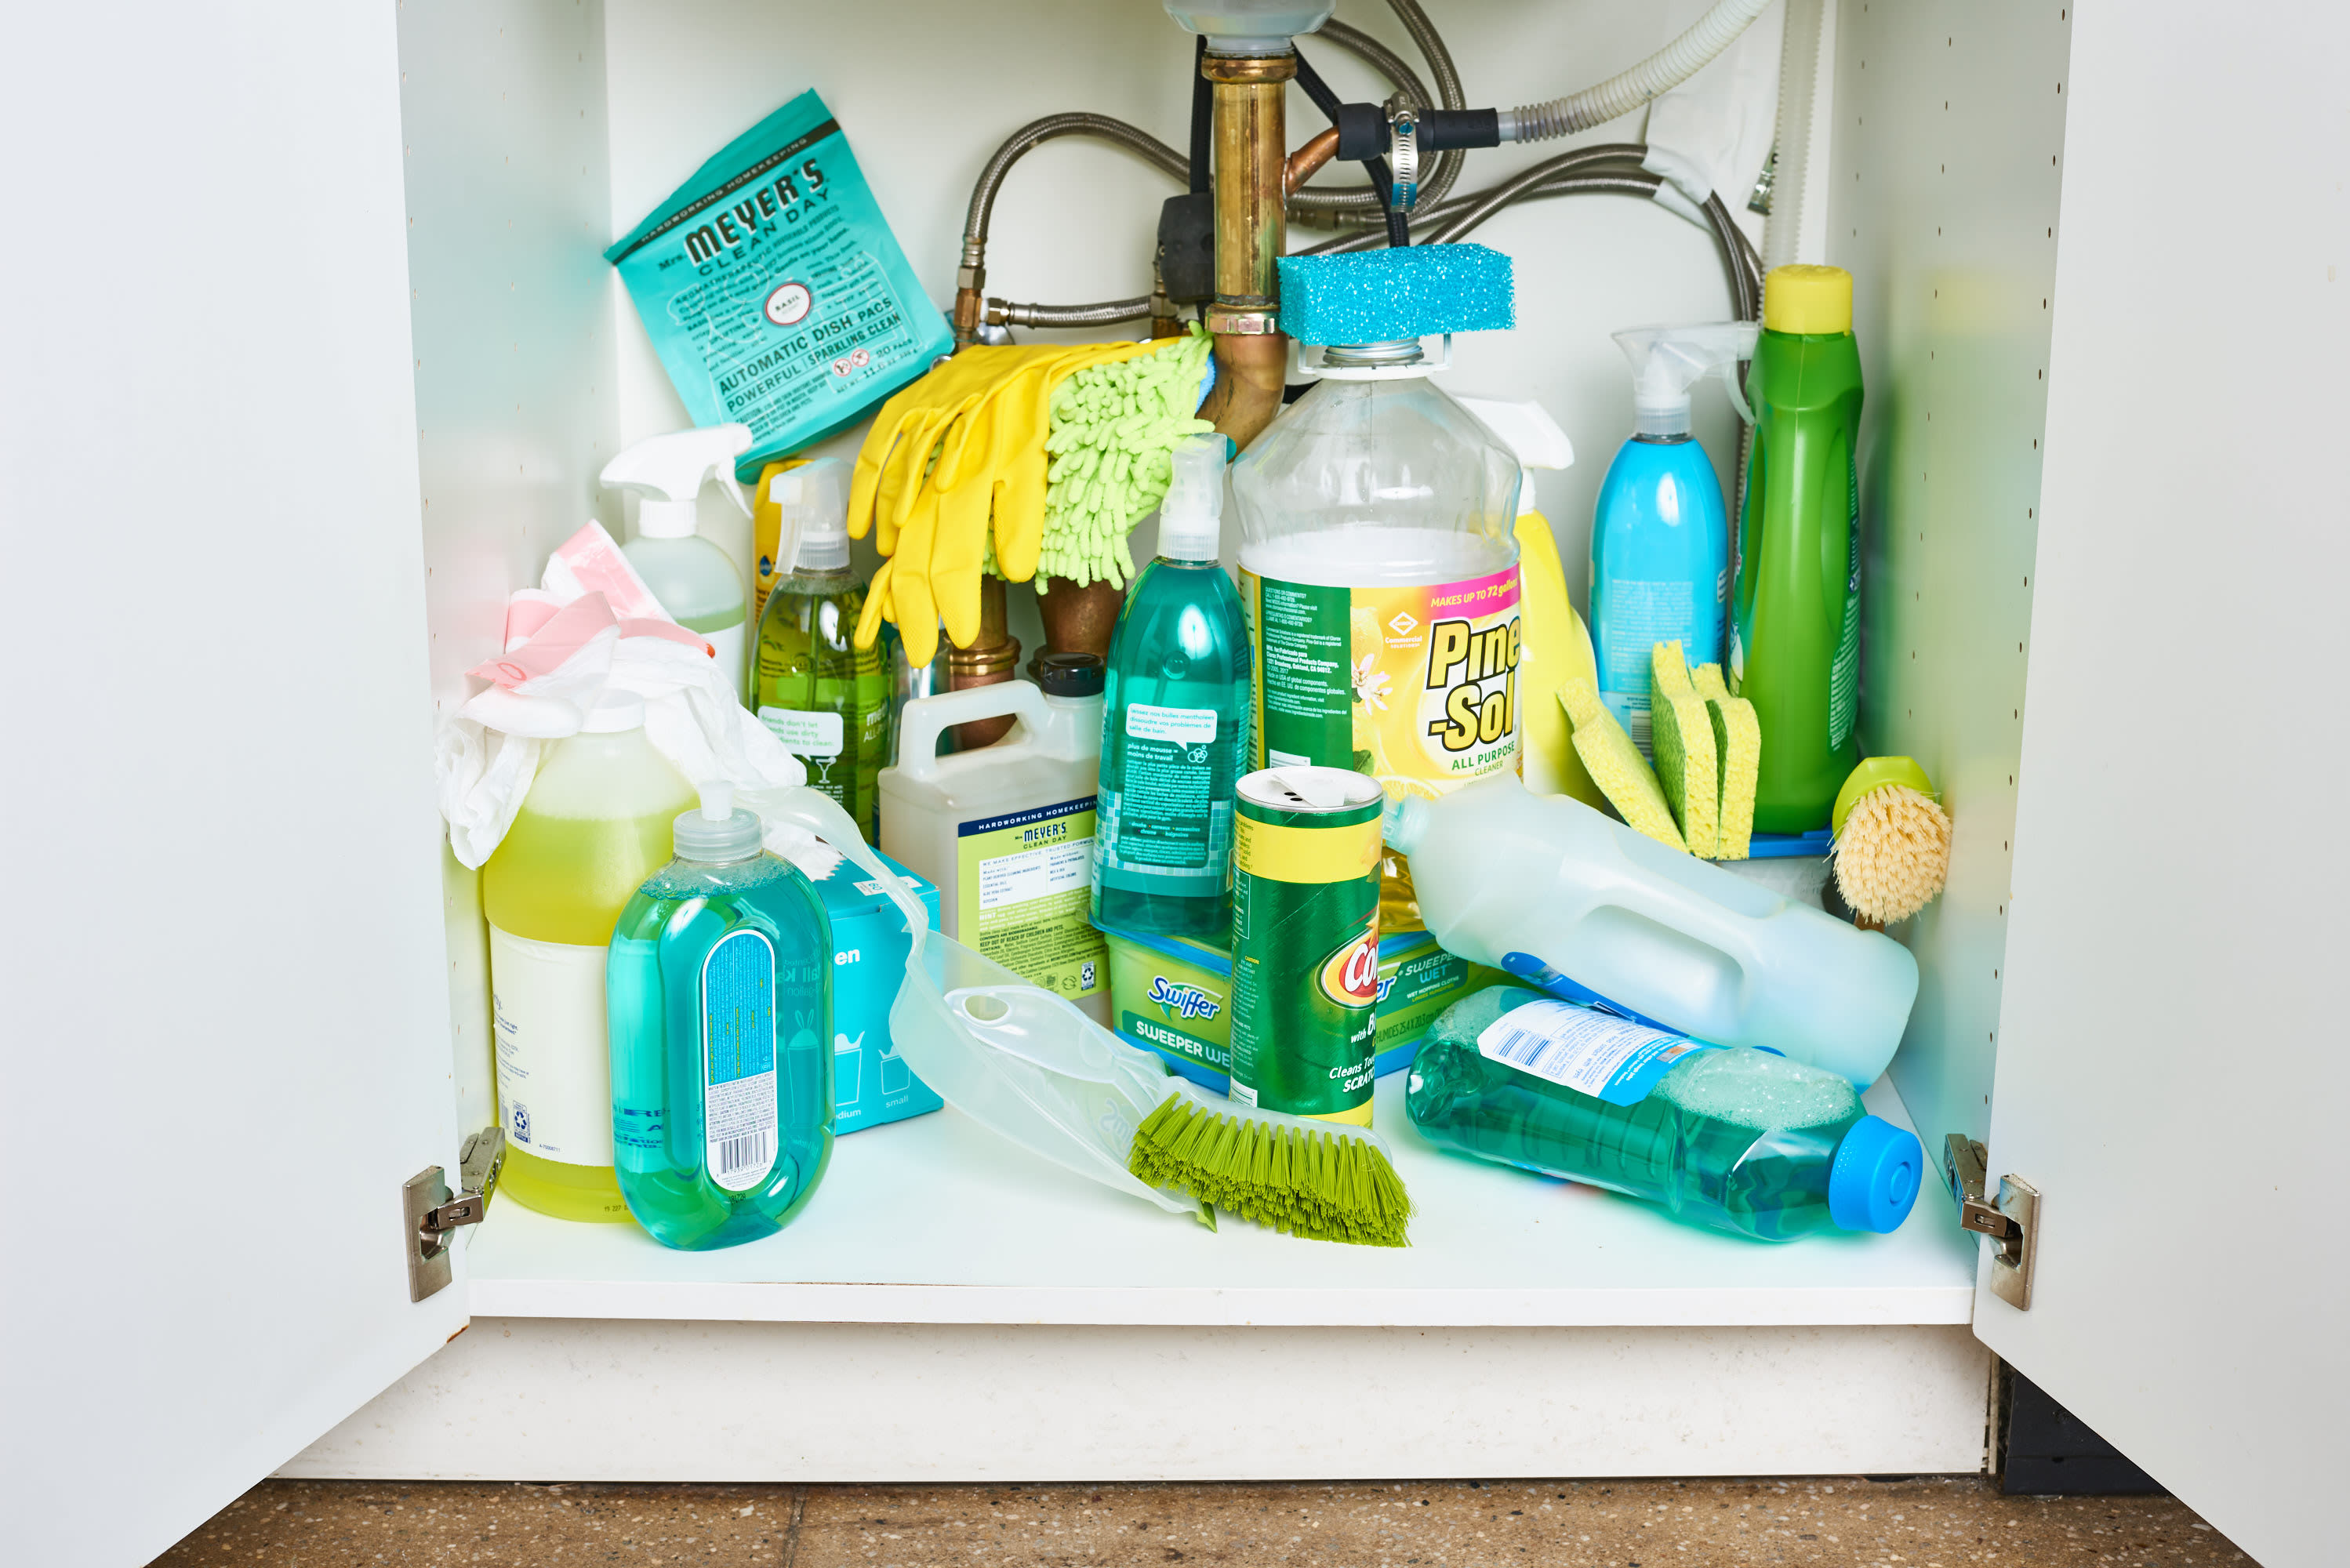 https://cdn.apartmenttherapy.info/image/upload/v1567543366/k/Photo/Lifestyle/2019-09-brilliant-ways-to-organize-all-of-your-cleaning-supplies/TK-Brilliant-Ways-to-Organize-All-of-Your-Cleaning-Supplies_105.jpg